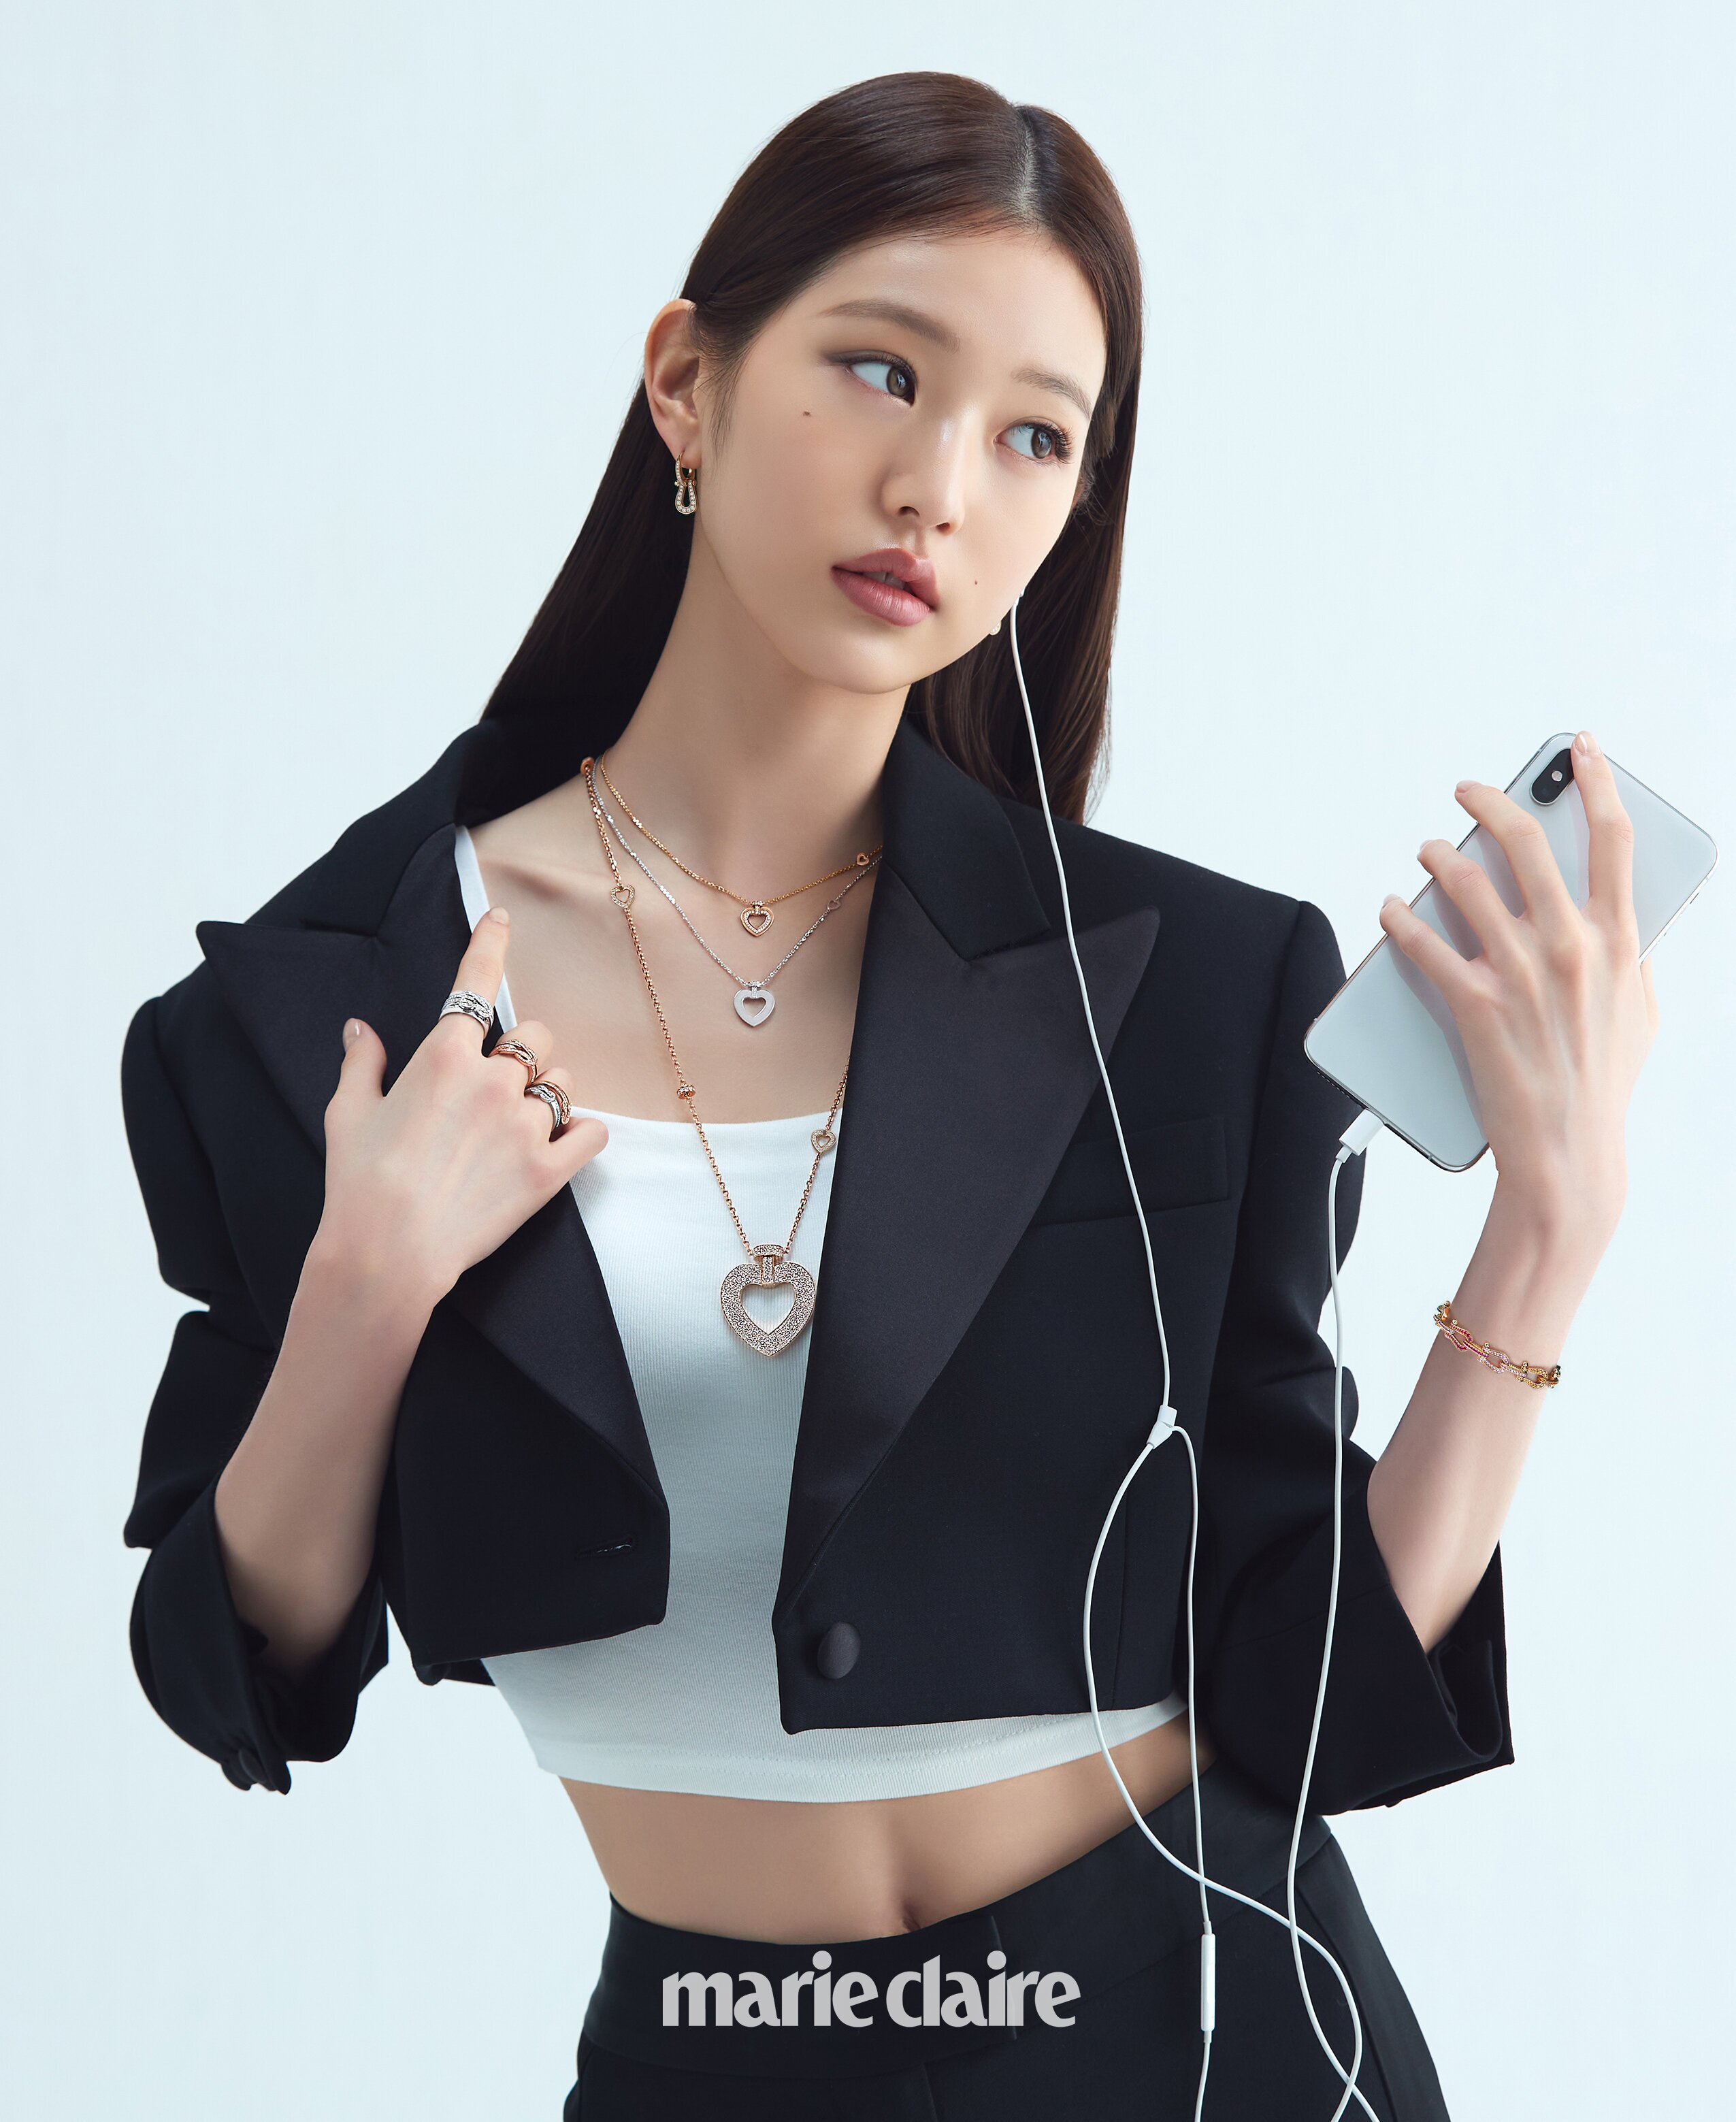 PHOTOSHOOT - IVE's Jang Wonyoung teams up with Fred Jewelry for Marie  Claire Korea